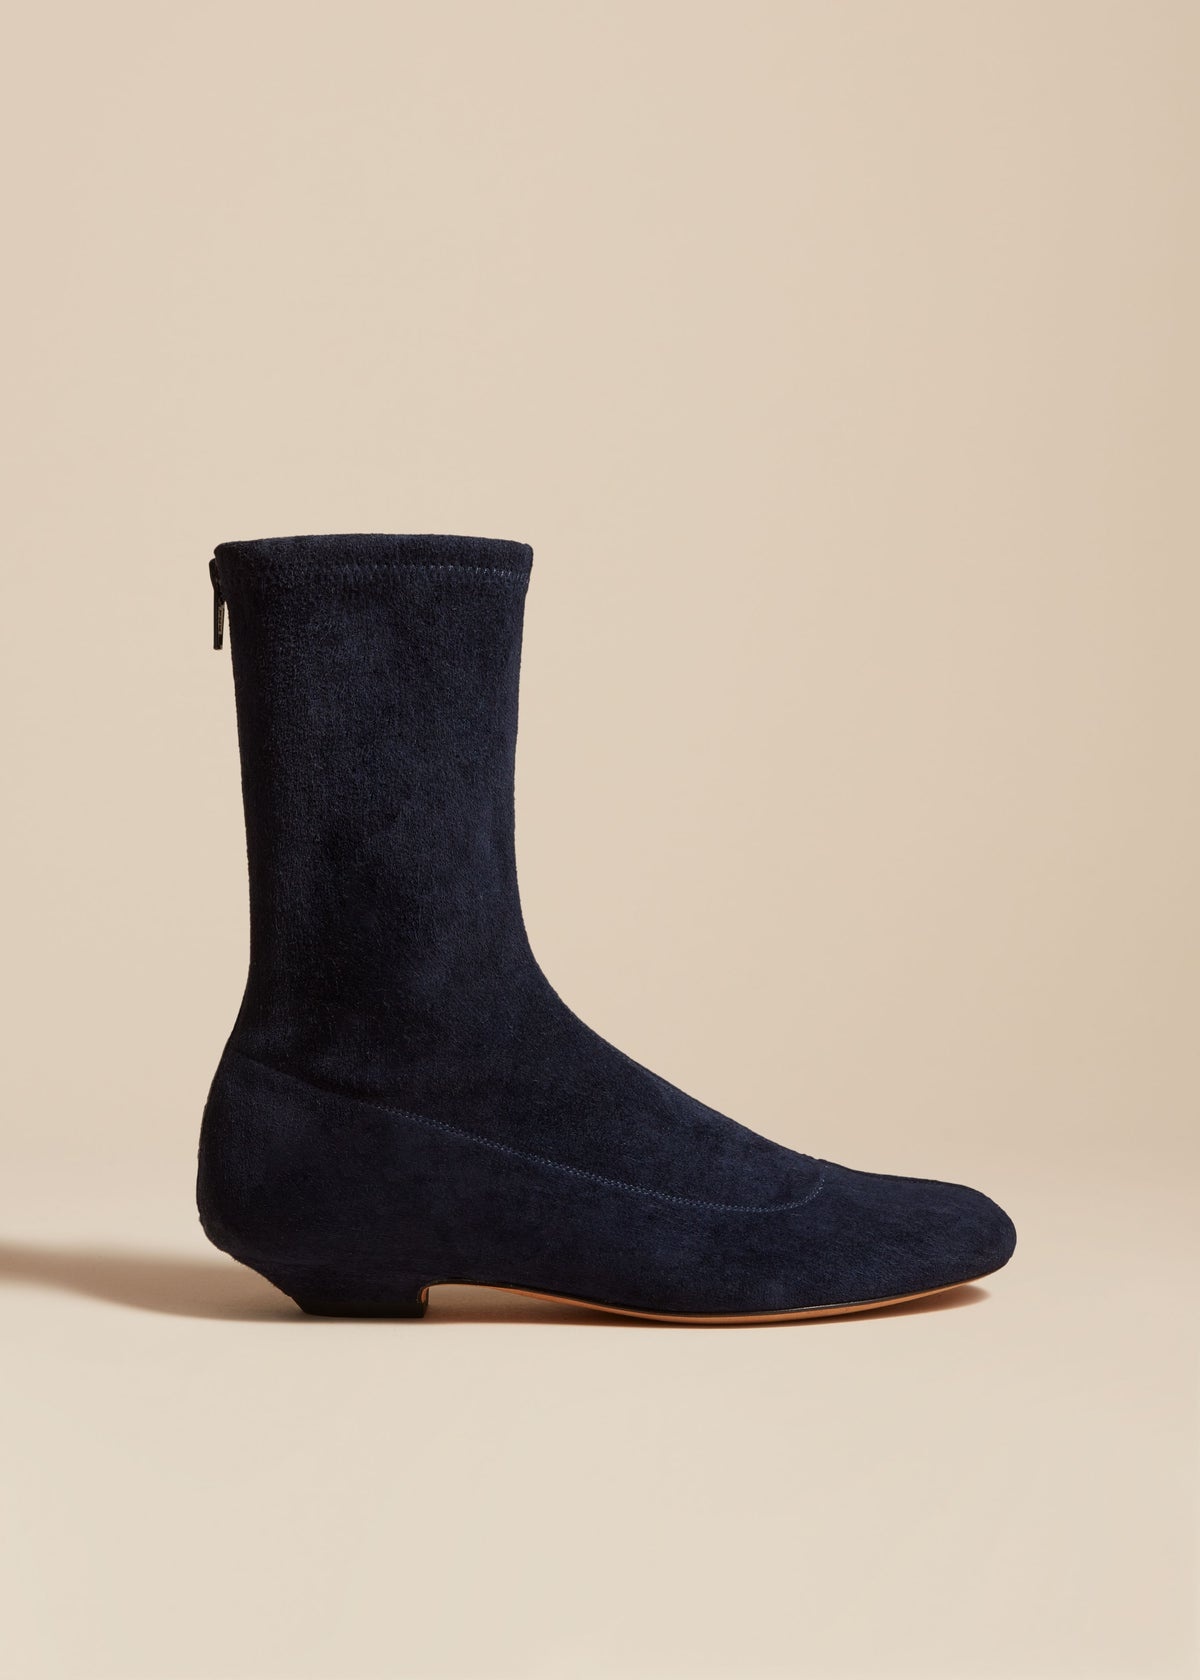 The Apollo Ankle Boot in Midnight Suede - 1